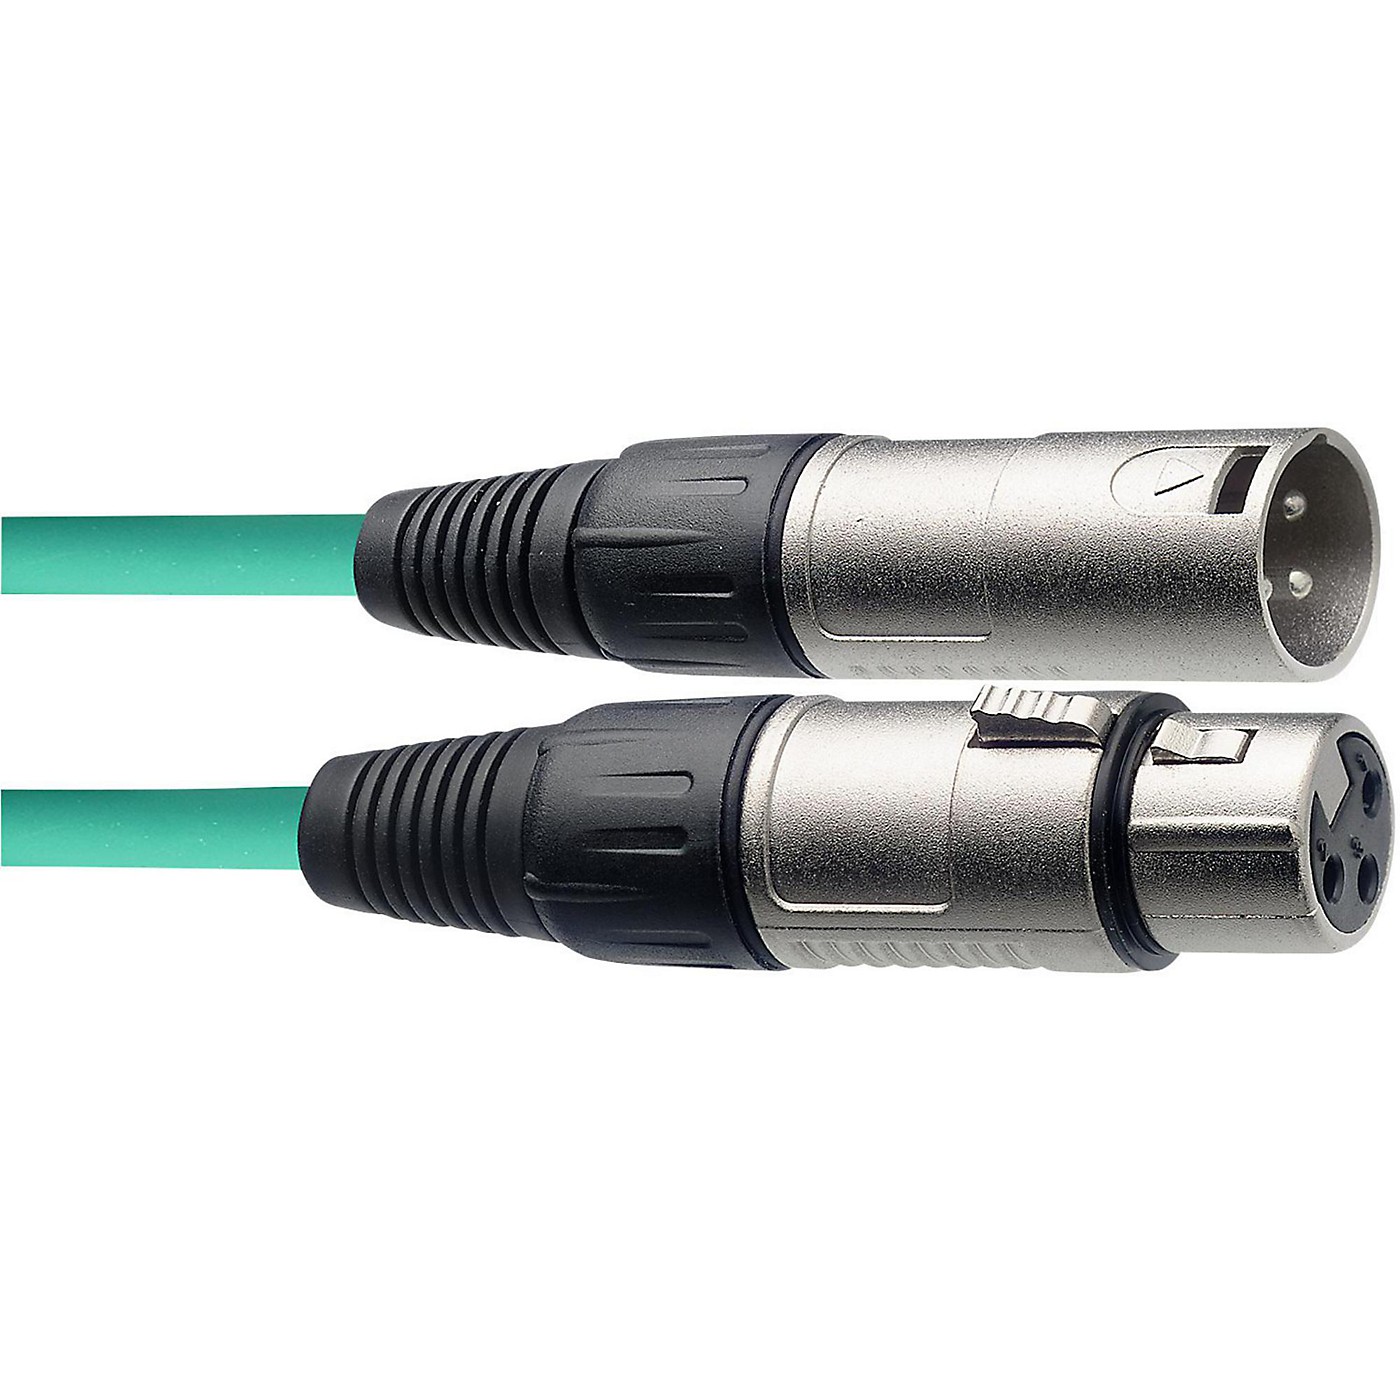 Stagg XLR Microphone Cable 20 ft. - Assorted Colors thumbnail